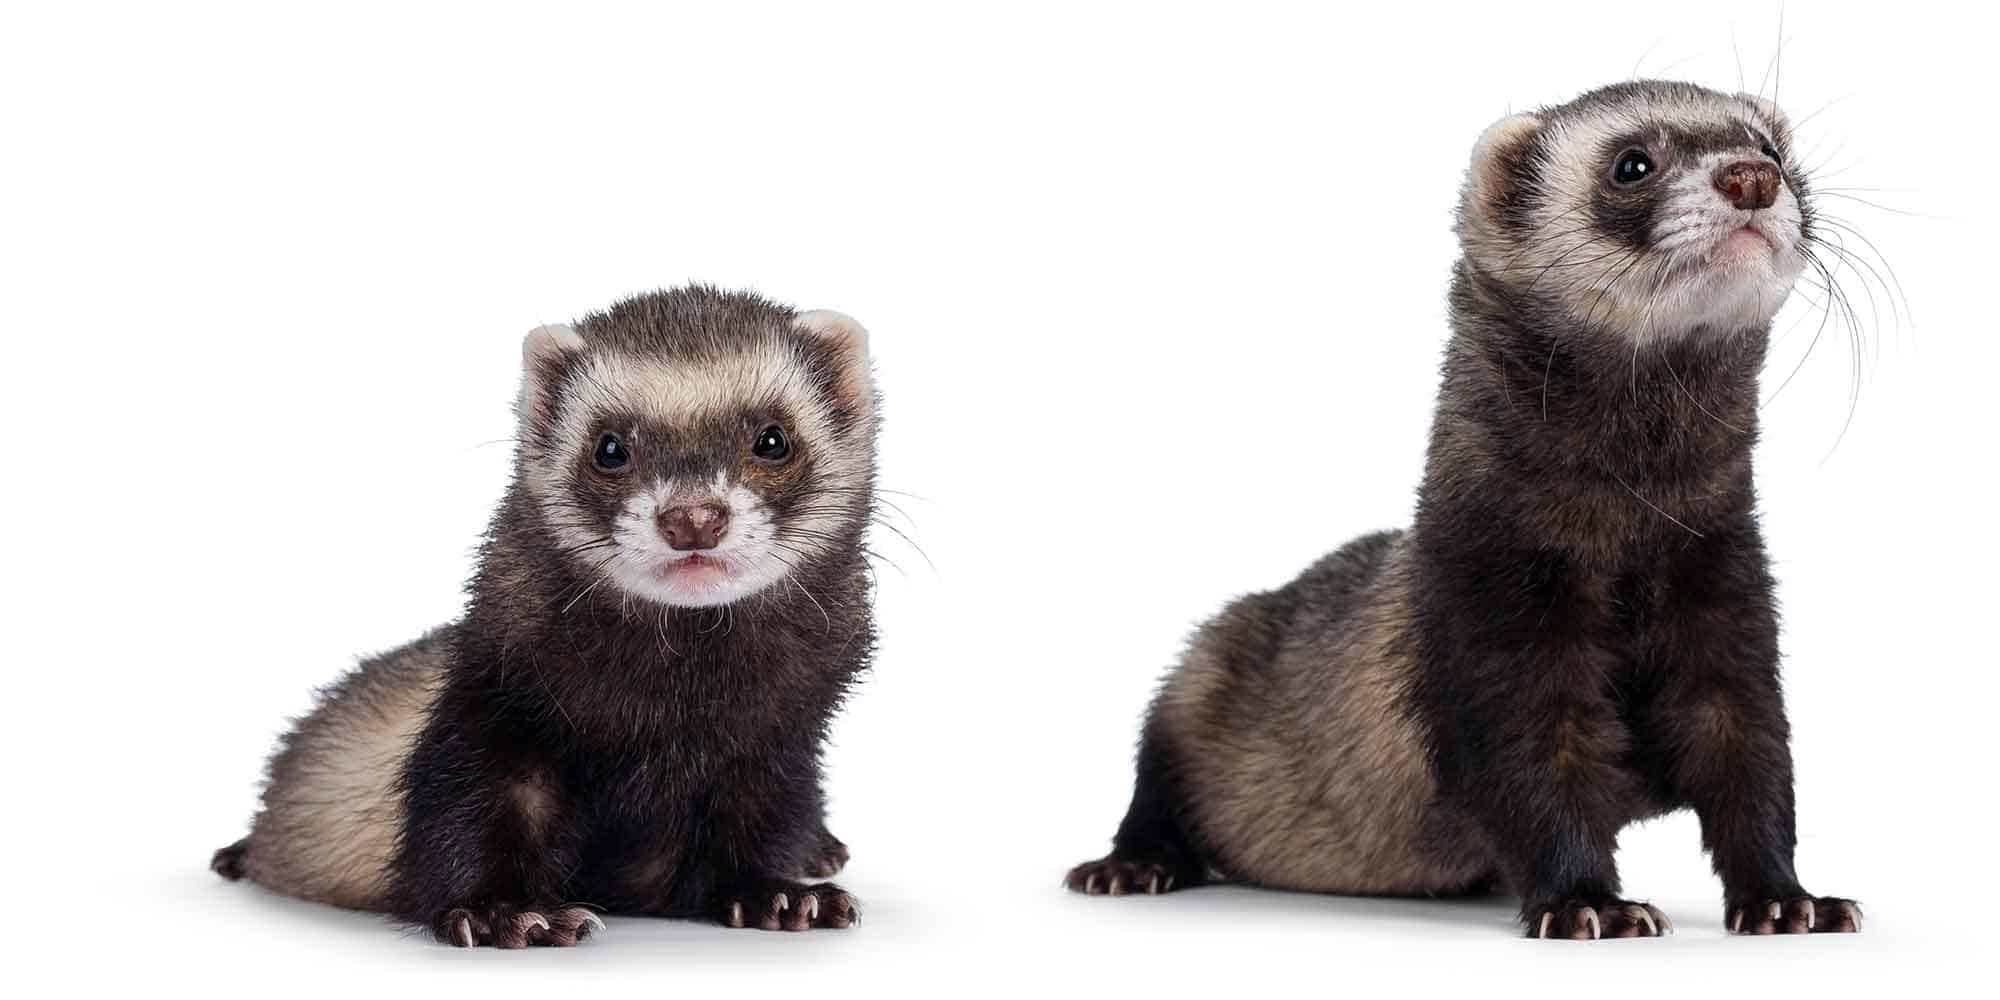 Ferret and rodent care